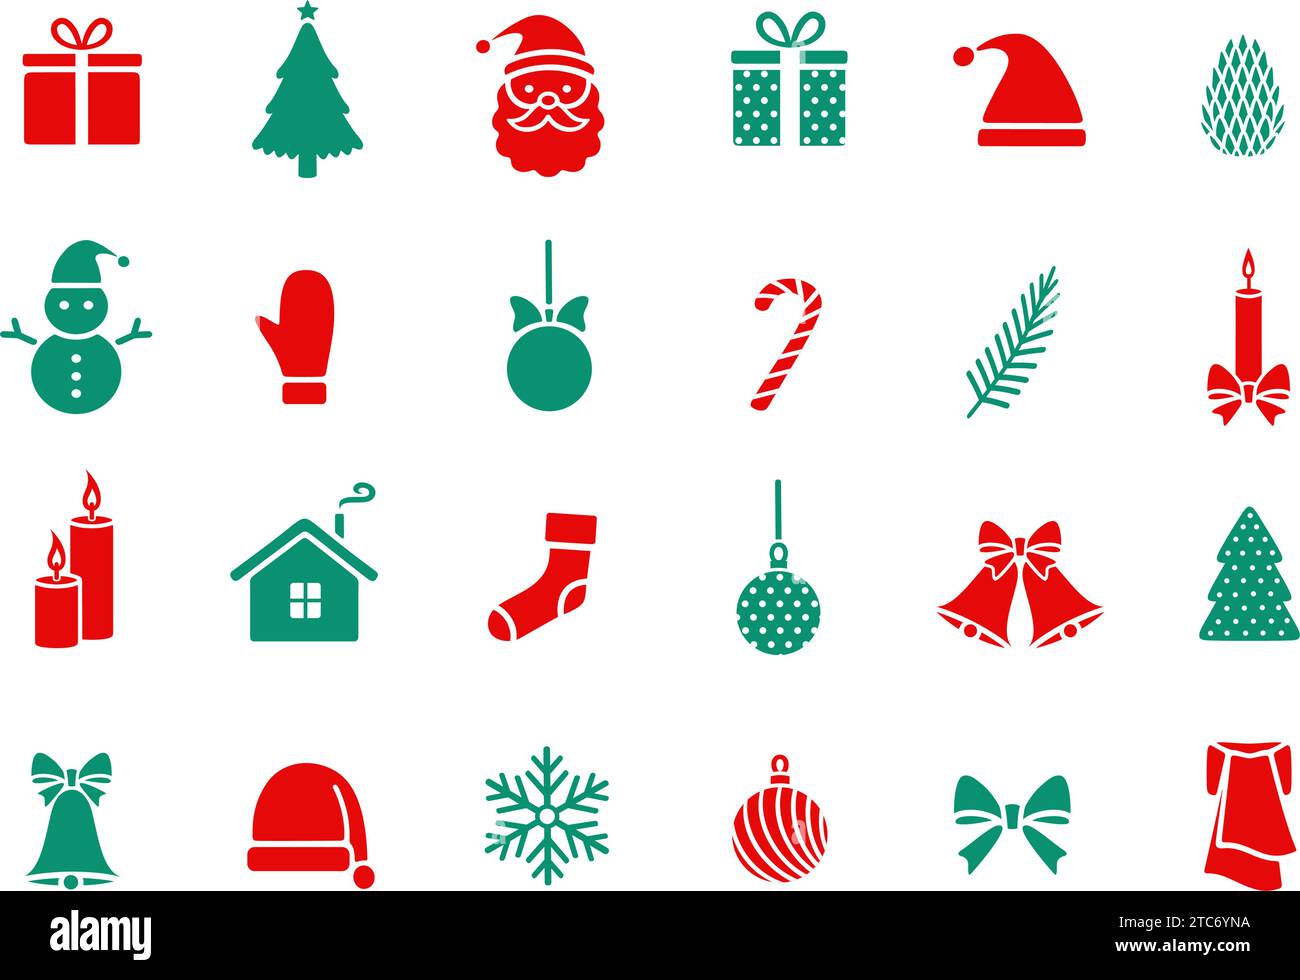 Christmas design elements icon. Jingle bells with bow, ball, fir tree, gift box, cap, cone, candy cane, candle, snowman, Santa Claus. Holiday accessor Stock Vector